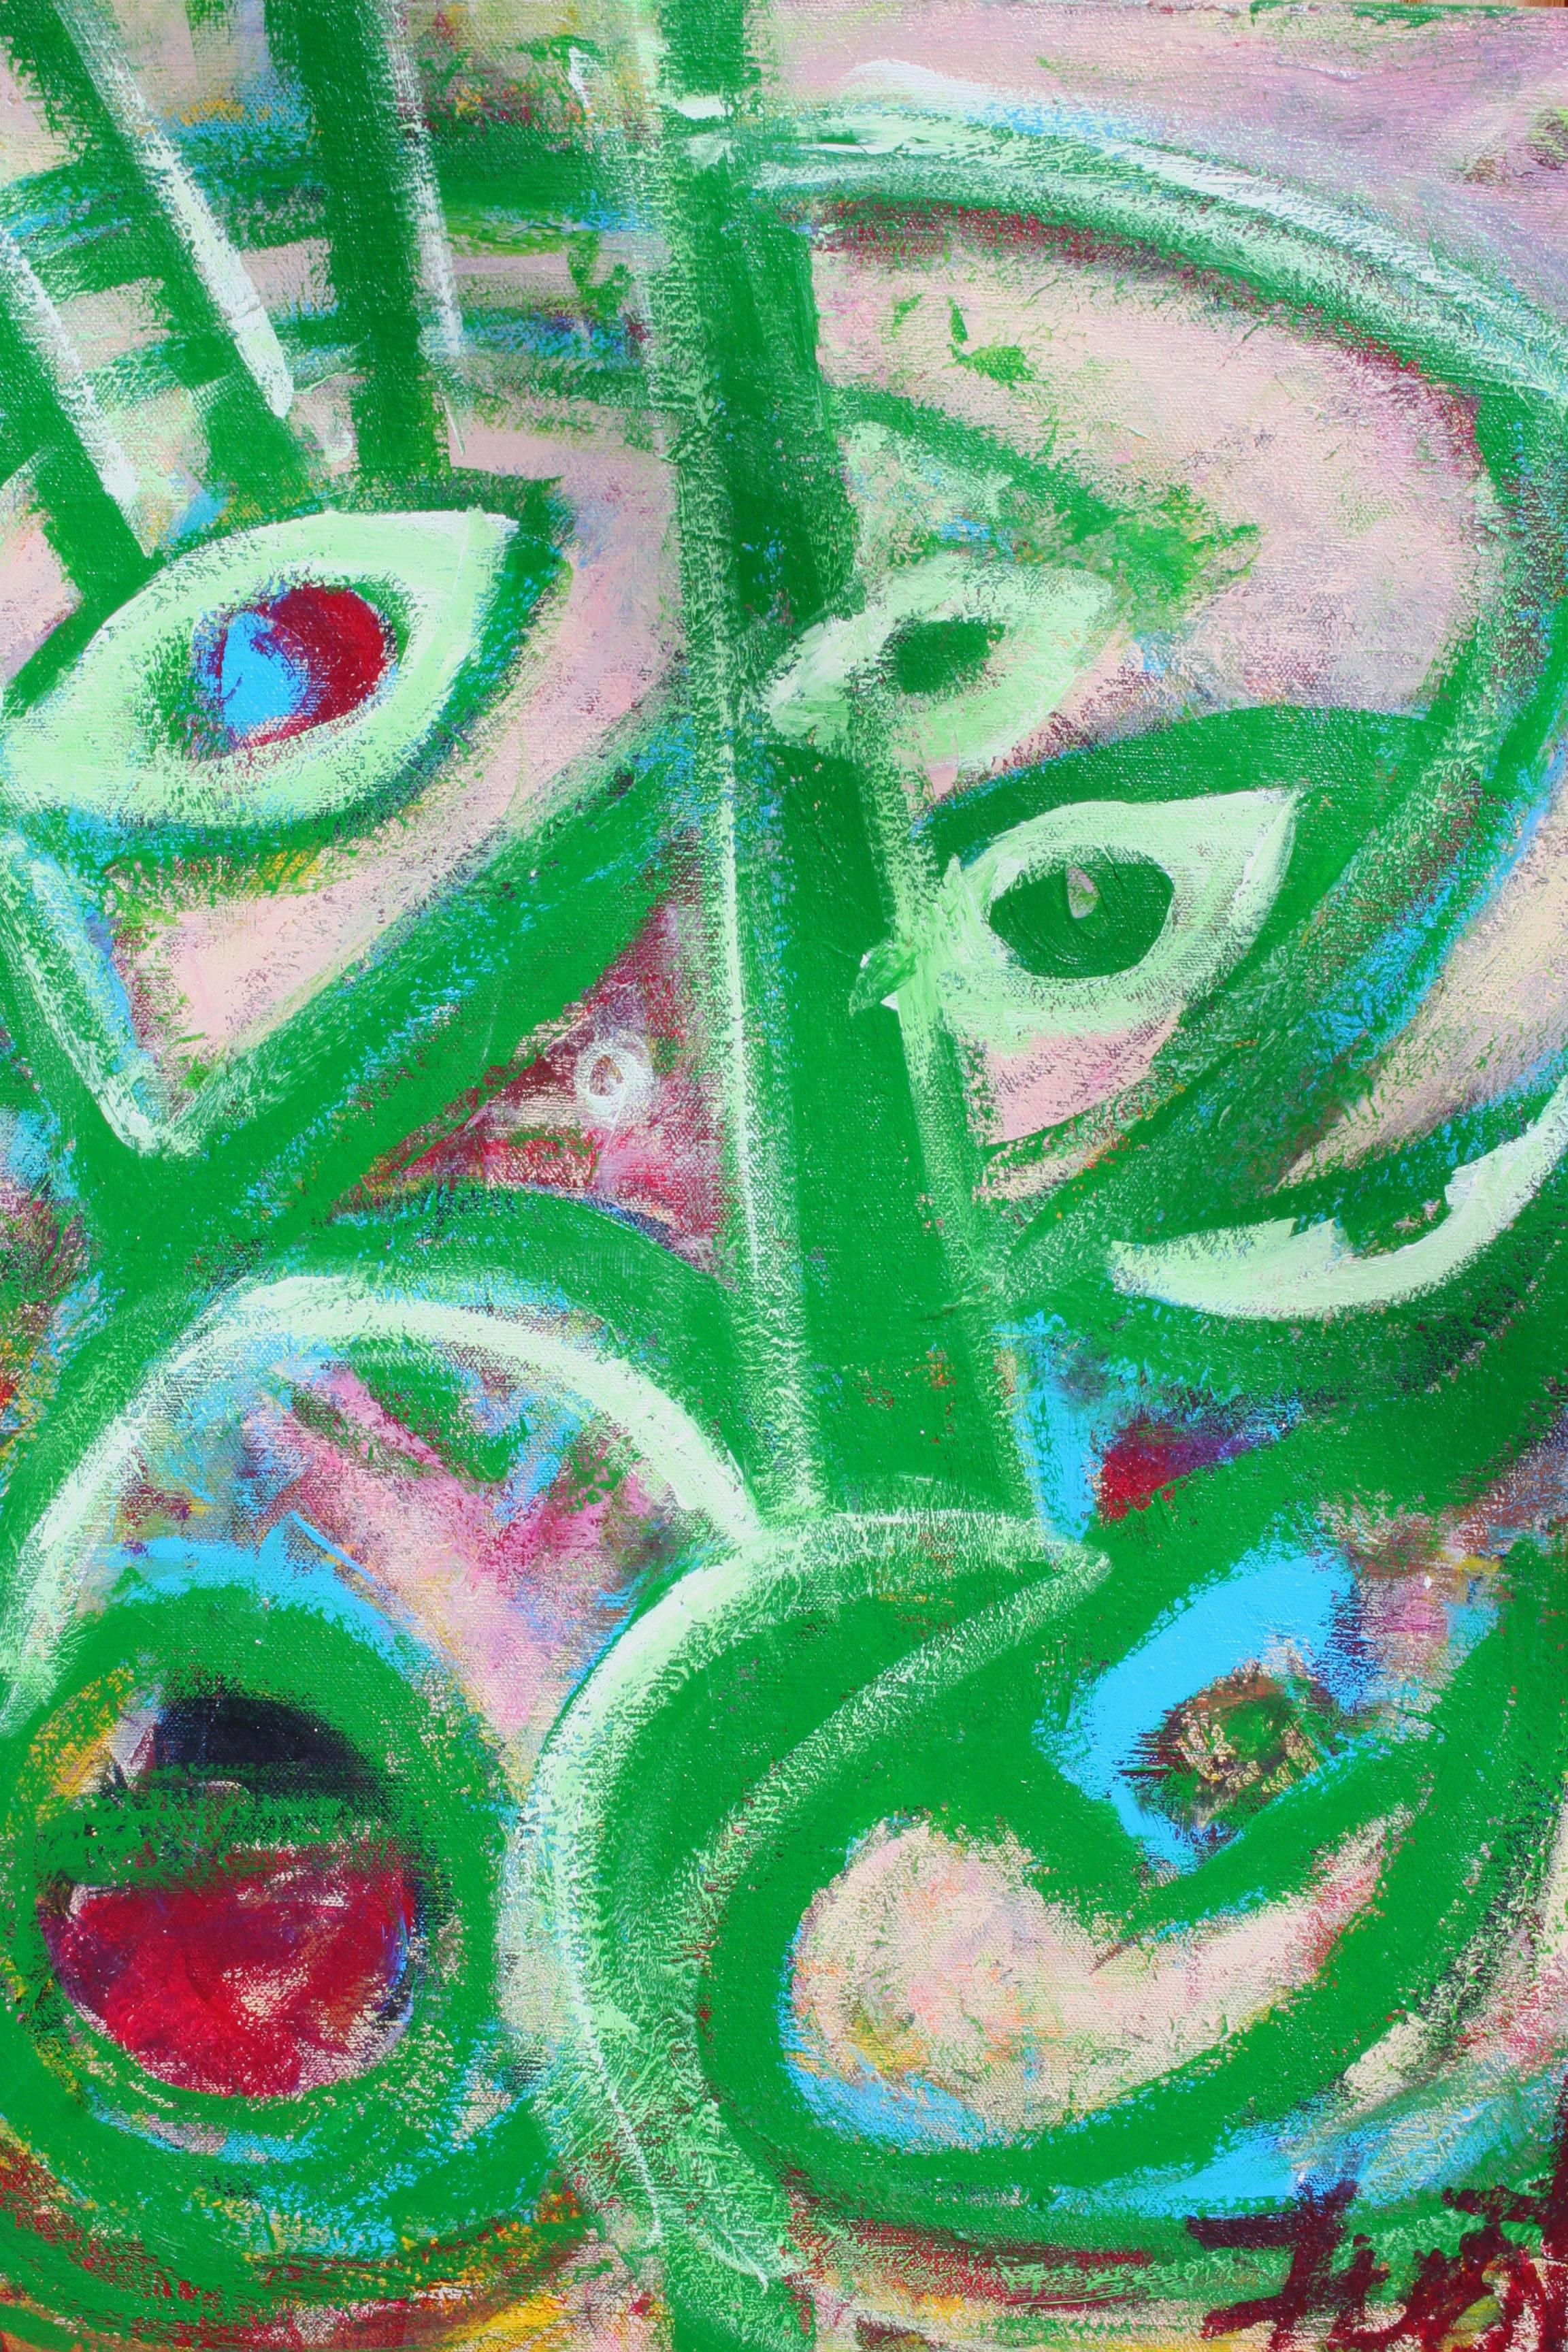 Garden Eyes Abstract  - Painting by Daniel David Fuentes